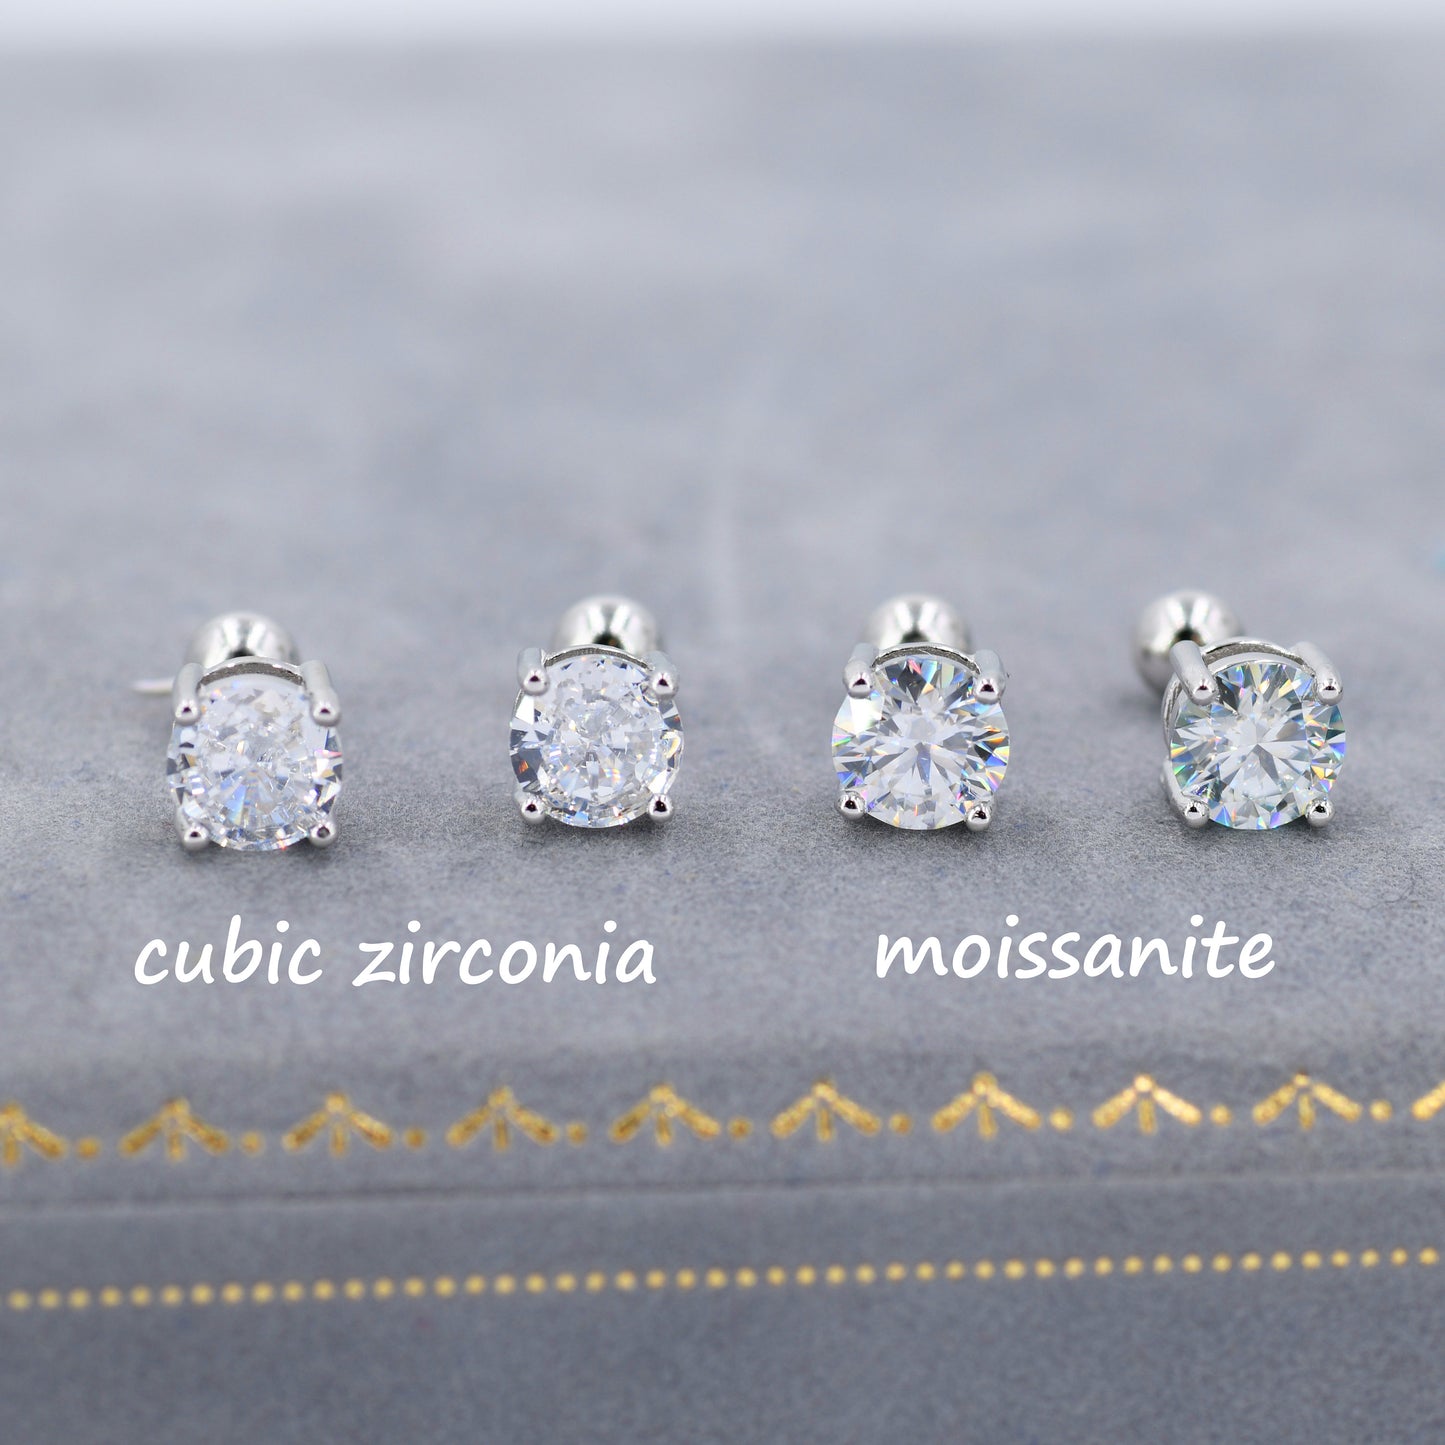 Moissanite  Earrings in Sterling Silver, Silver or Gold, Butterfly Backs or Screw Backs, Available in 3mm, 4mm, 5mm 6mm, Four Prong Set